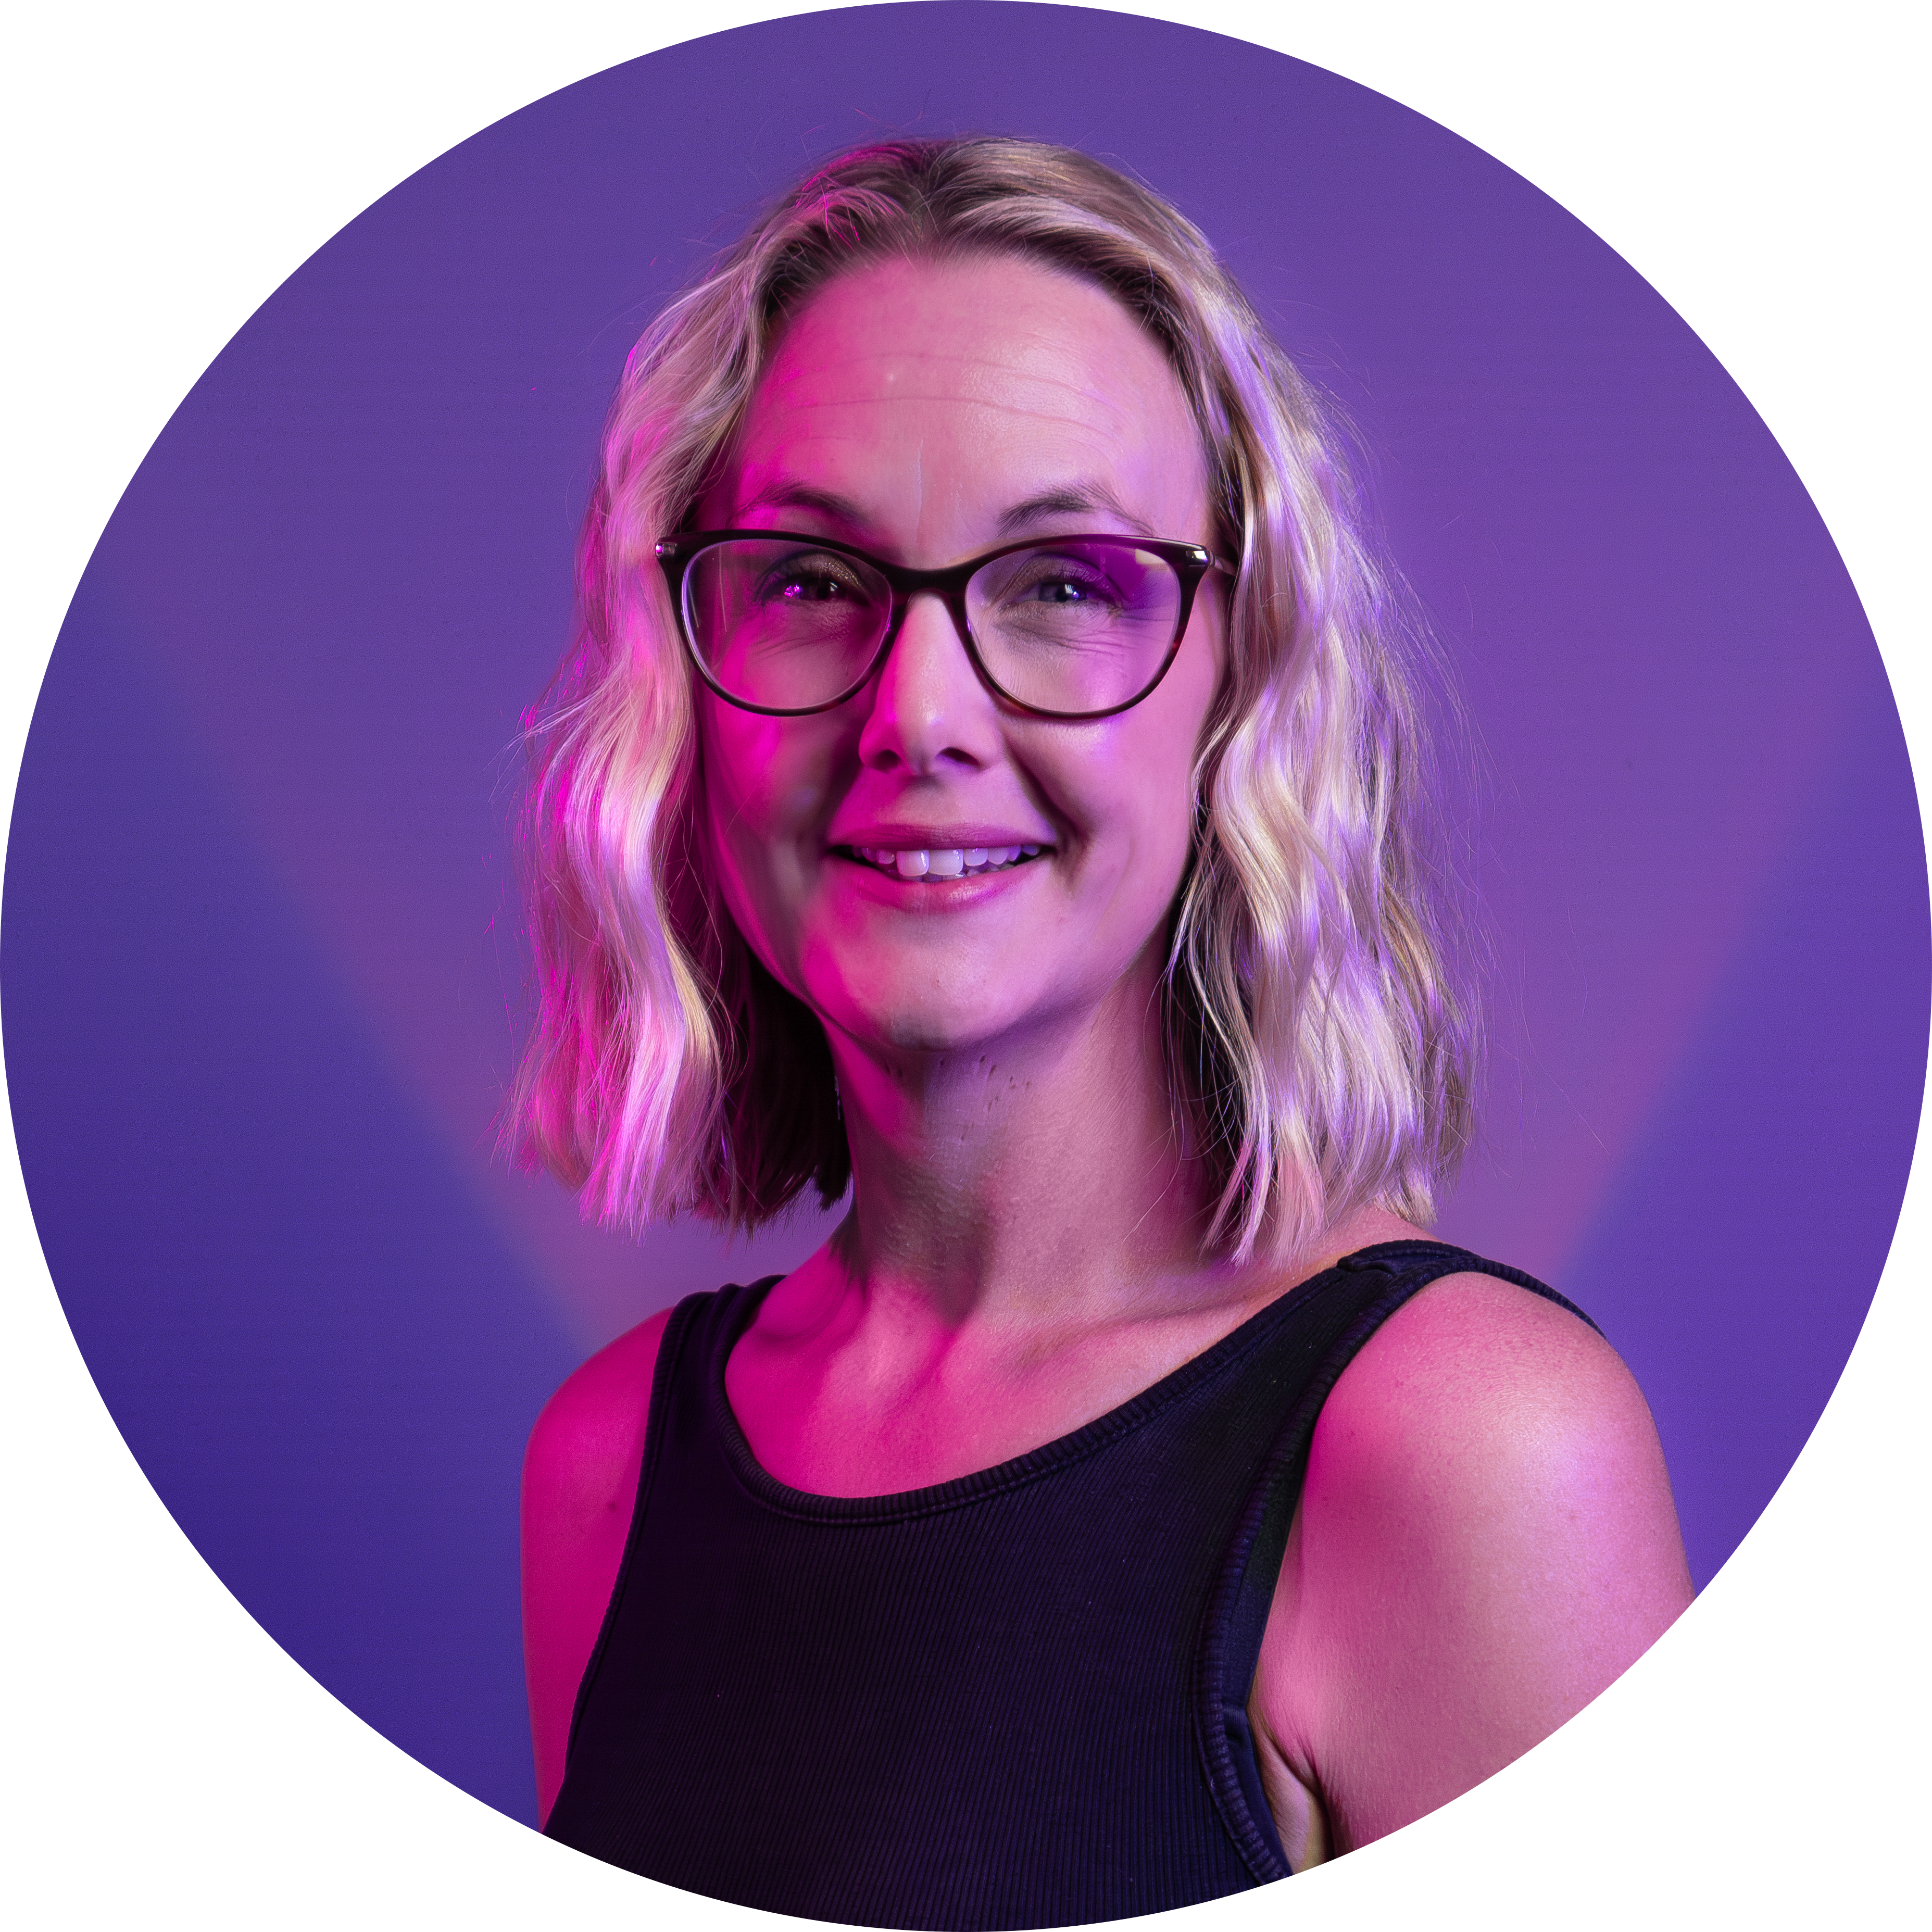 Sam Slee – a blonde woman with shoulder length hair and dark rimmed glasses – smiles against a purple background.